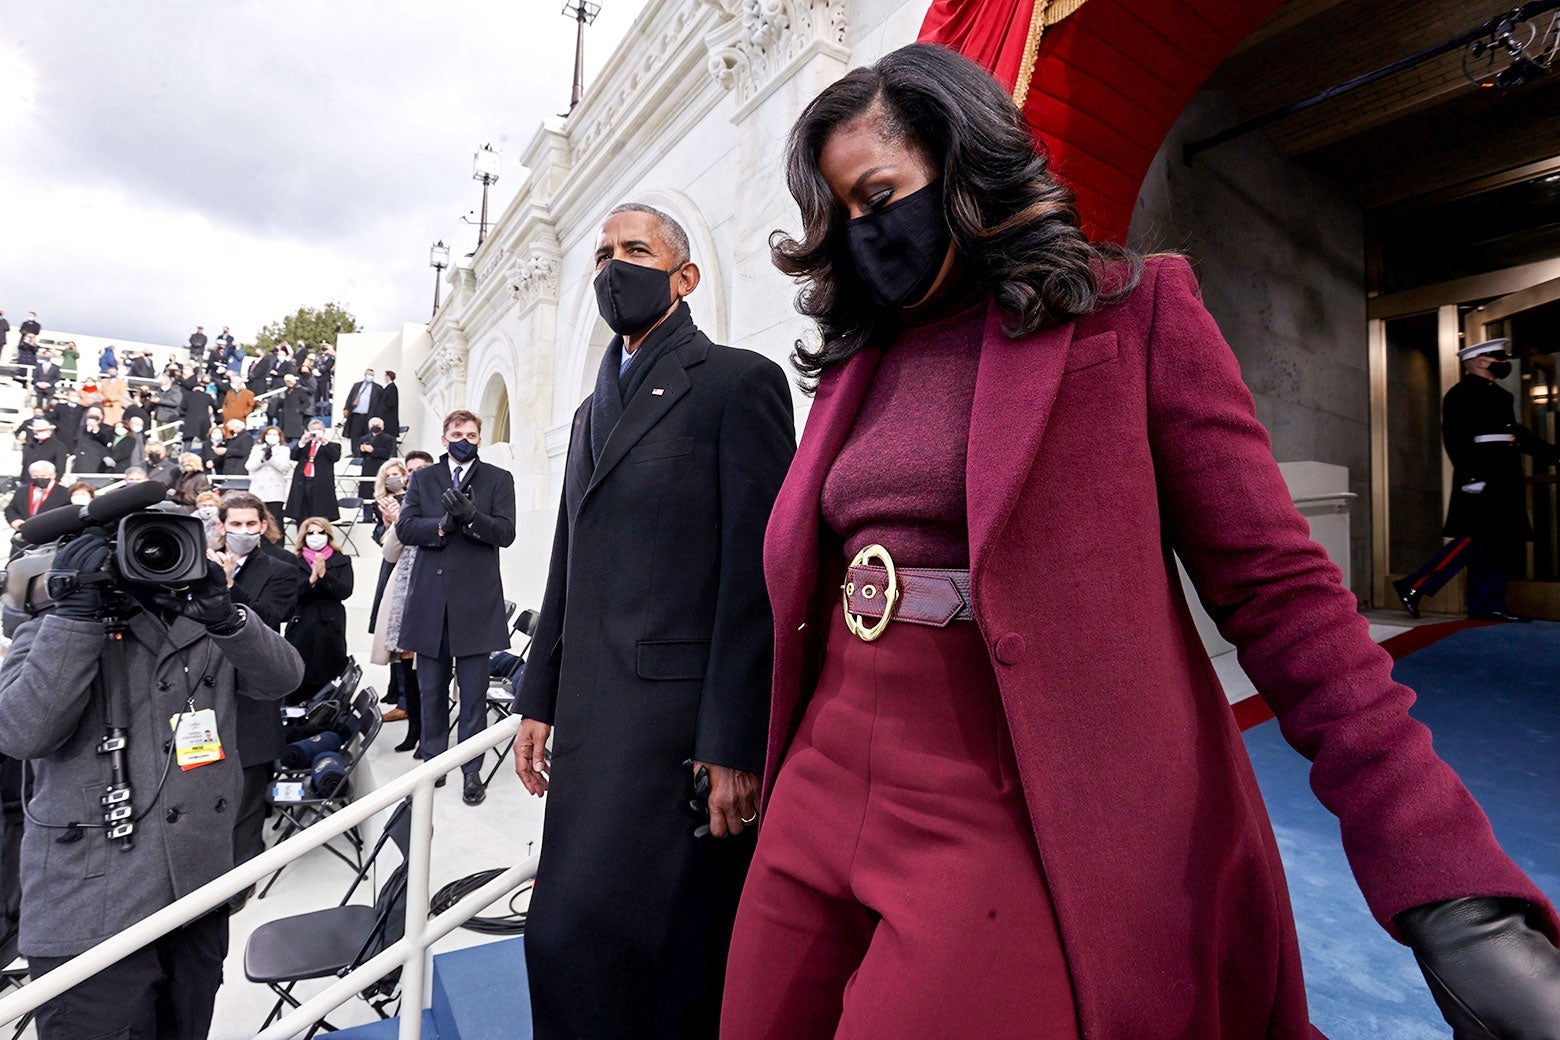 Barack and Michelle Obama arrive at the inauguration. Barack wears a black overcoat, scarf, and mask. Michelle wears a maroon coat with matching pants, sweater, and belt with a large, gold buckle.